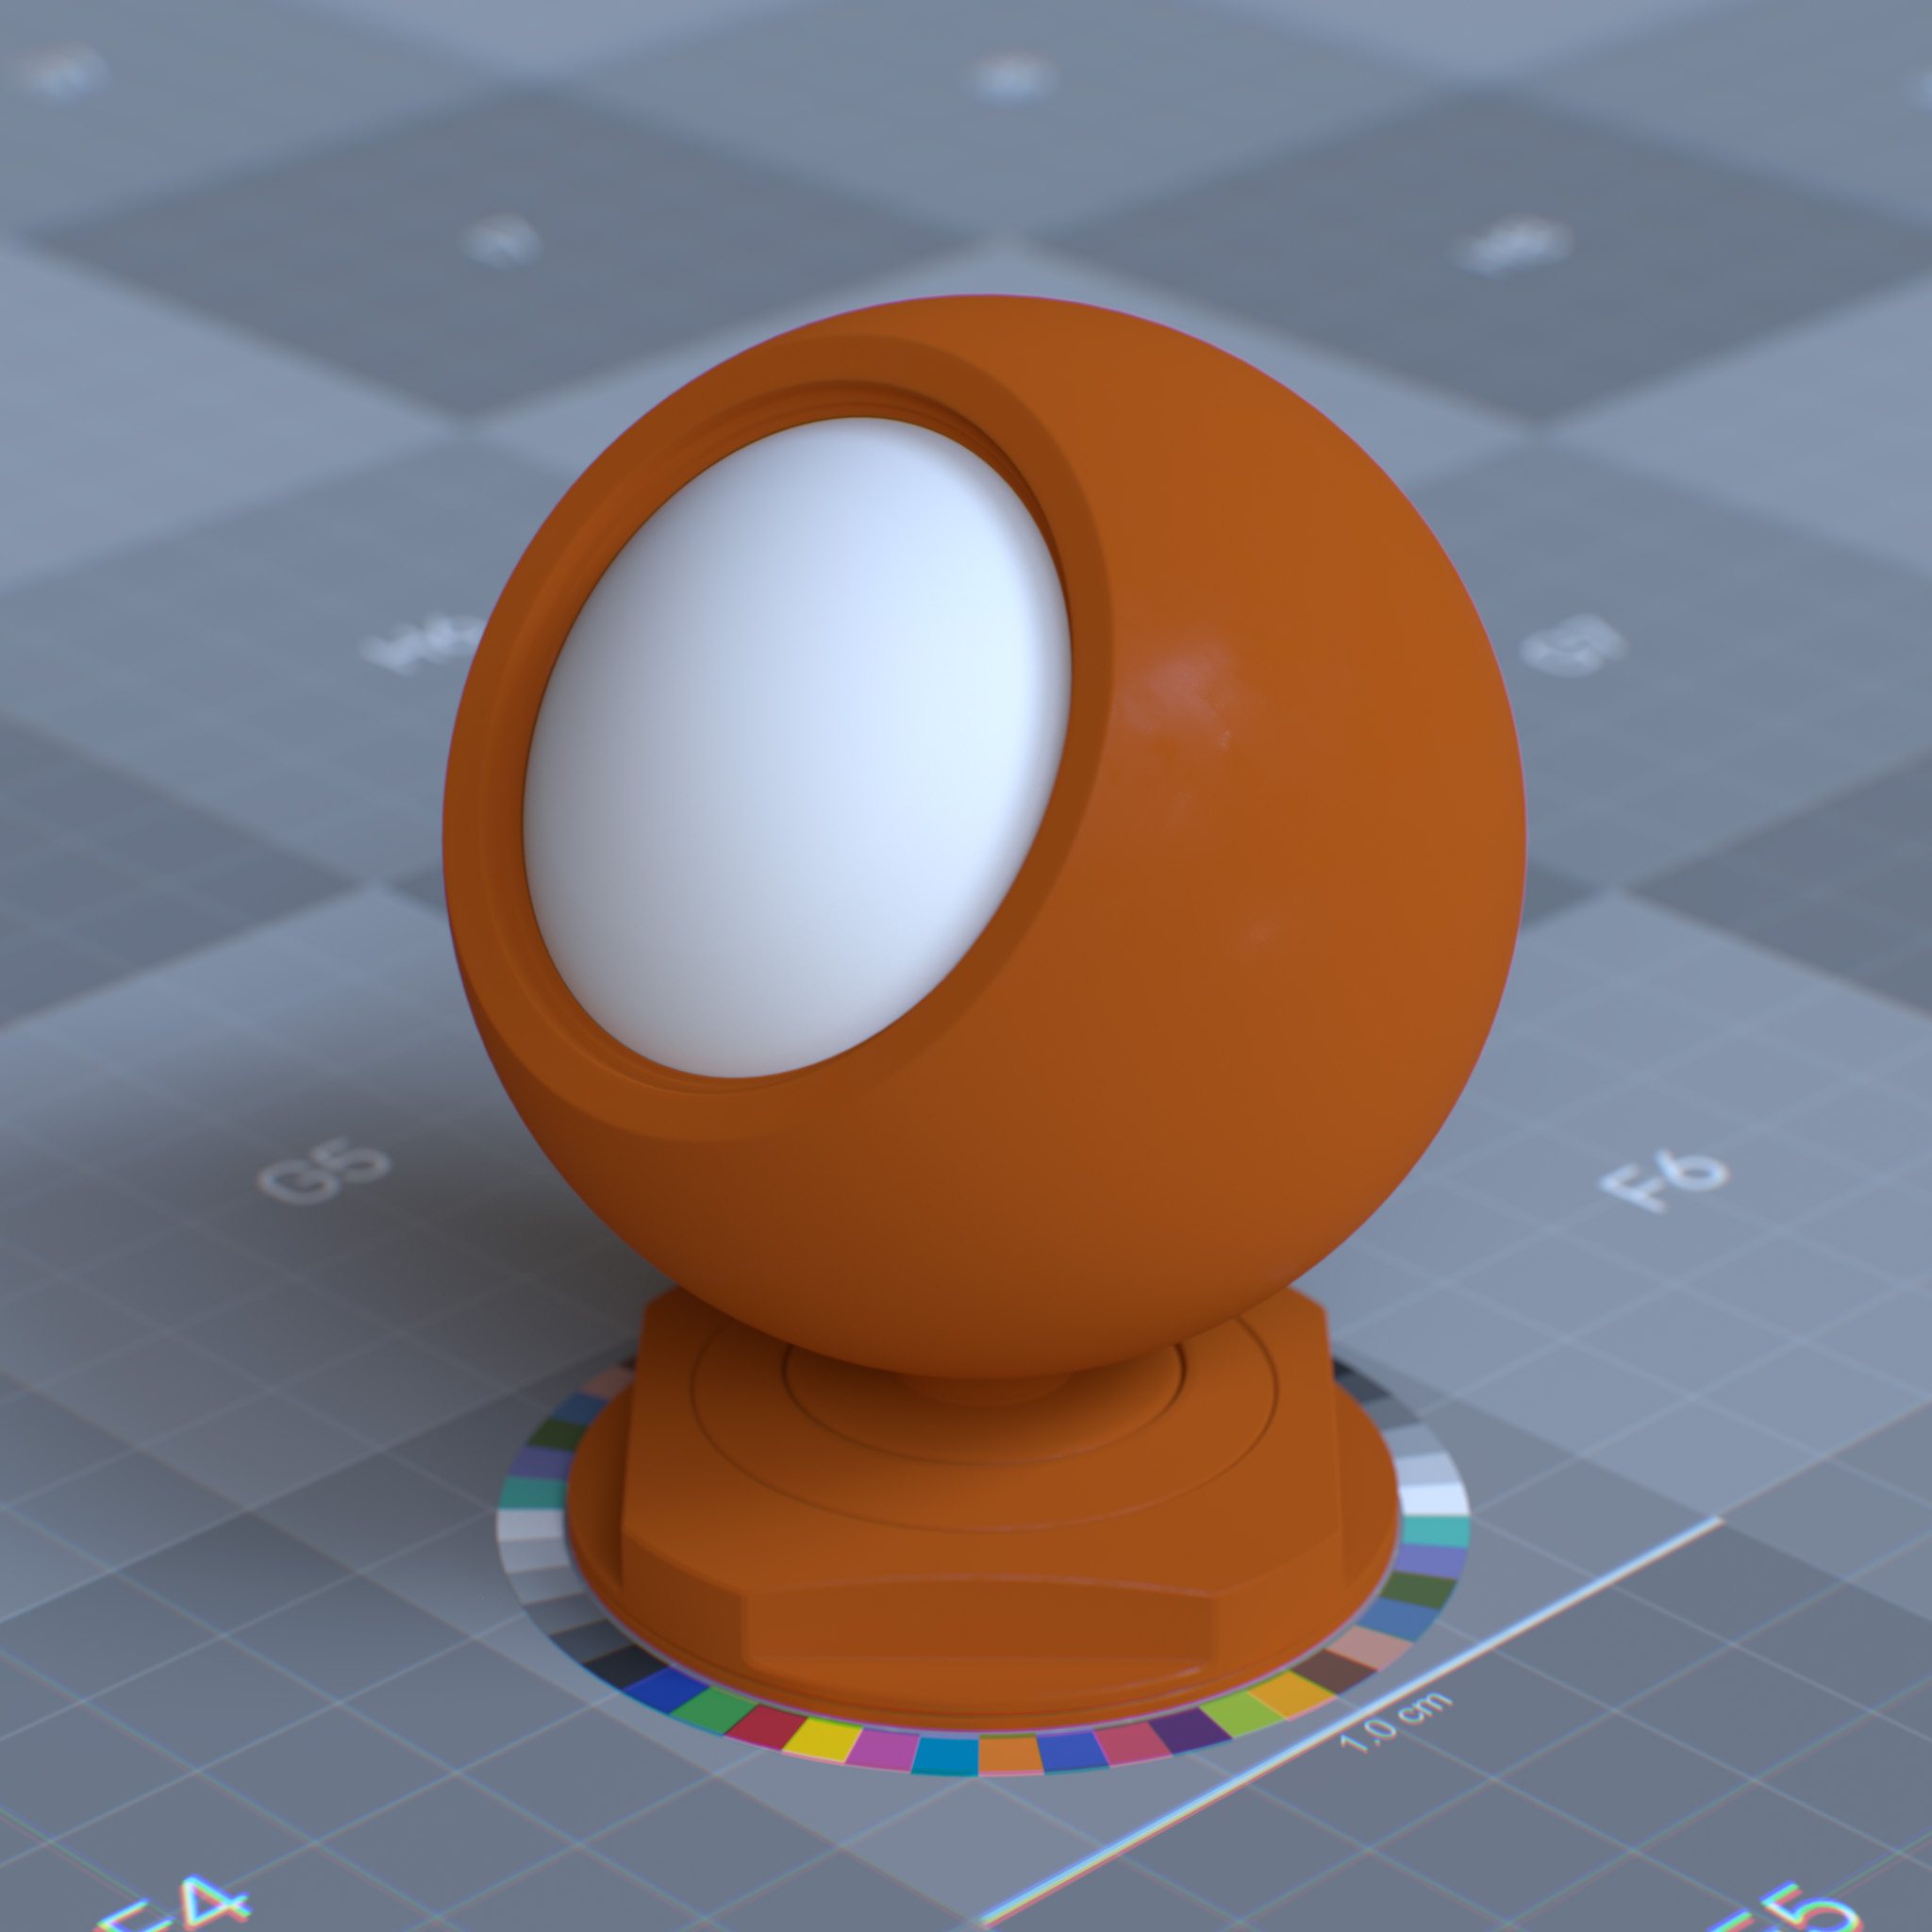 rtx_material_omnisurfacebase_diffuse_reflection_roughness_1p0